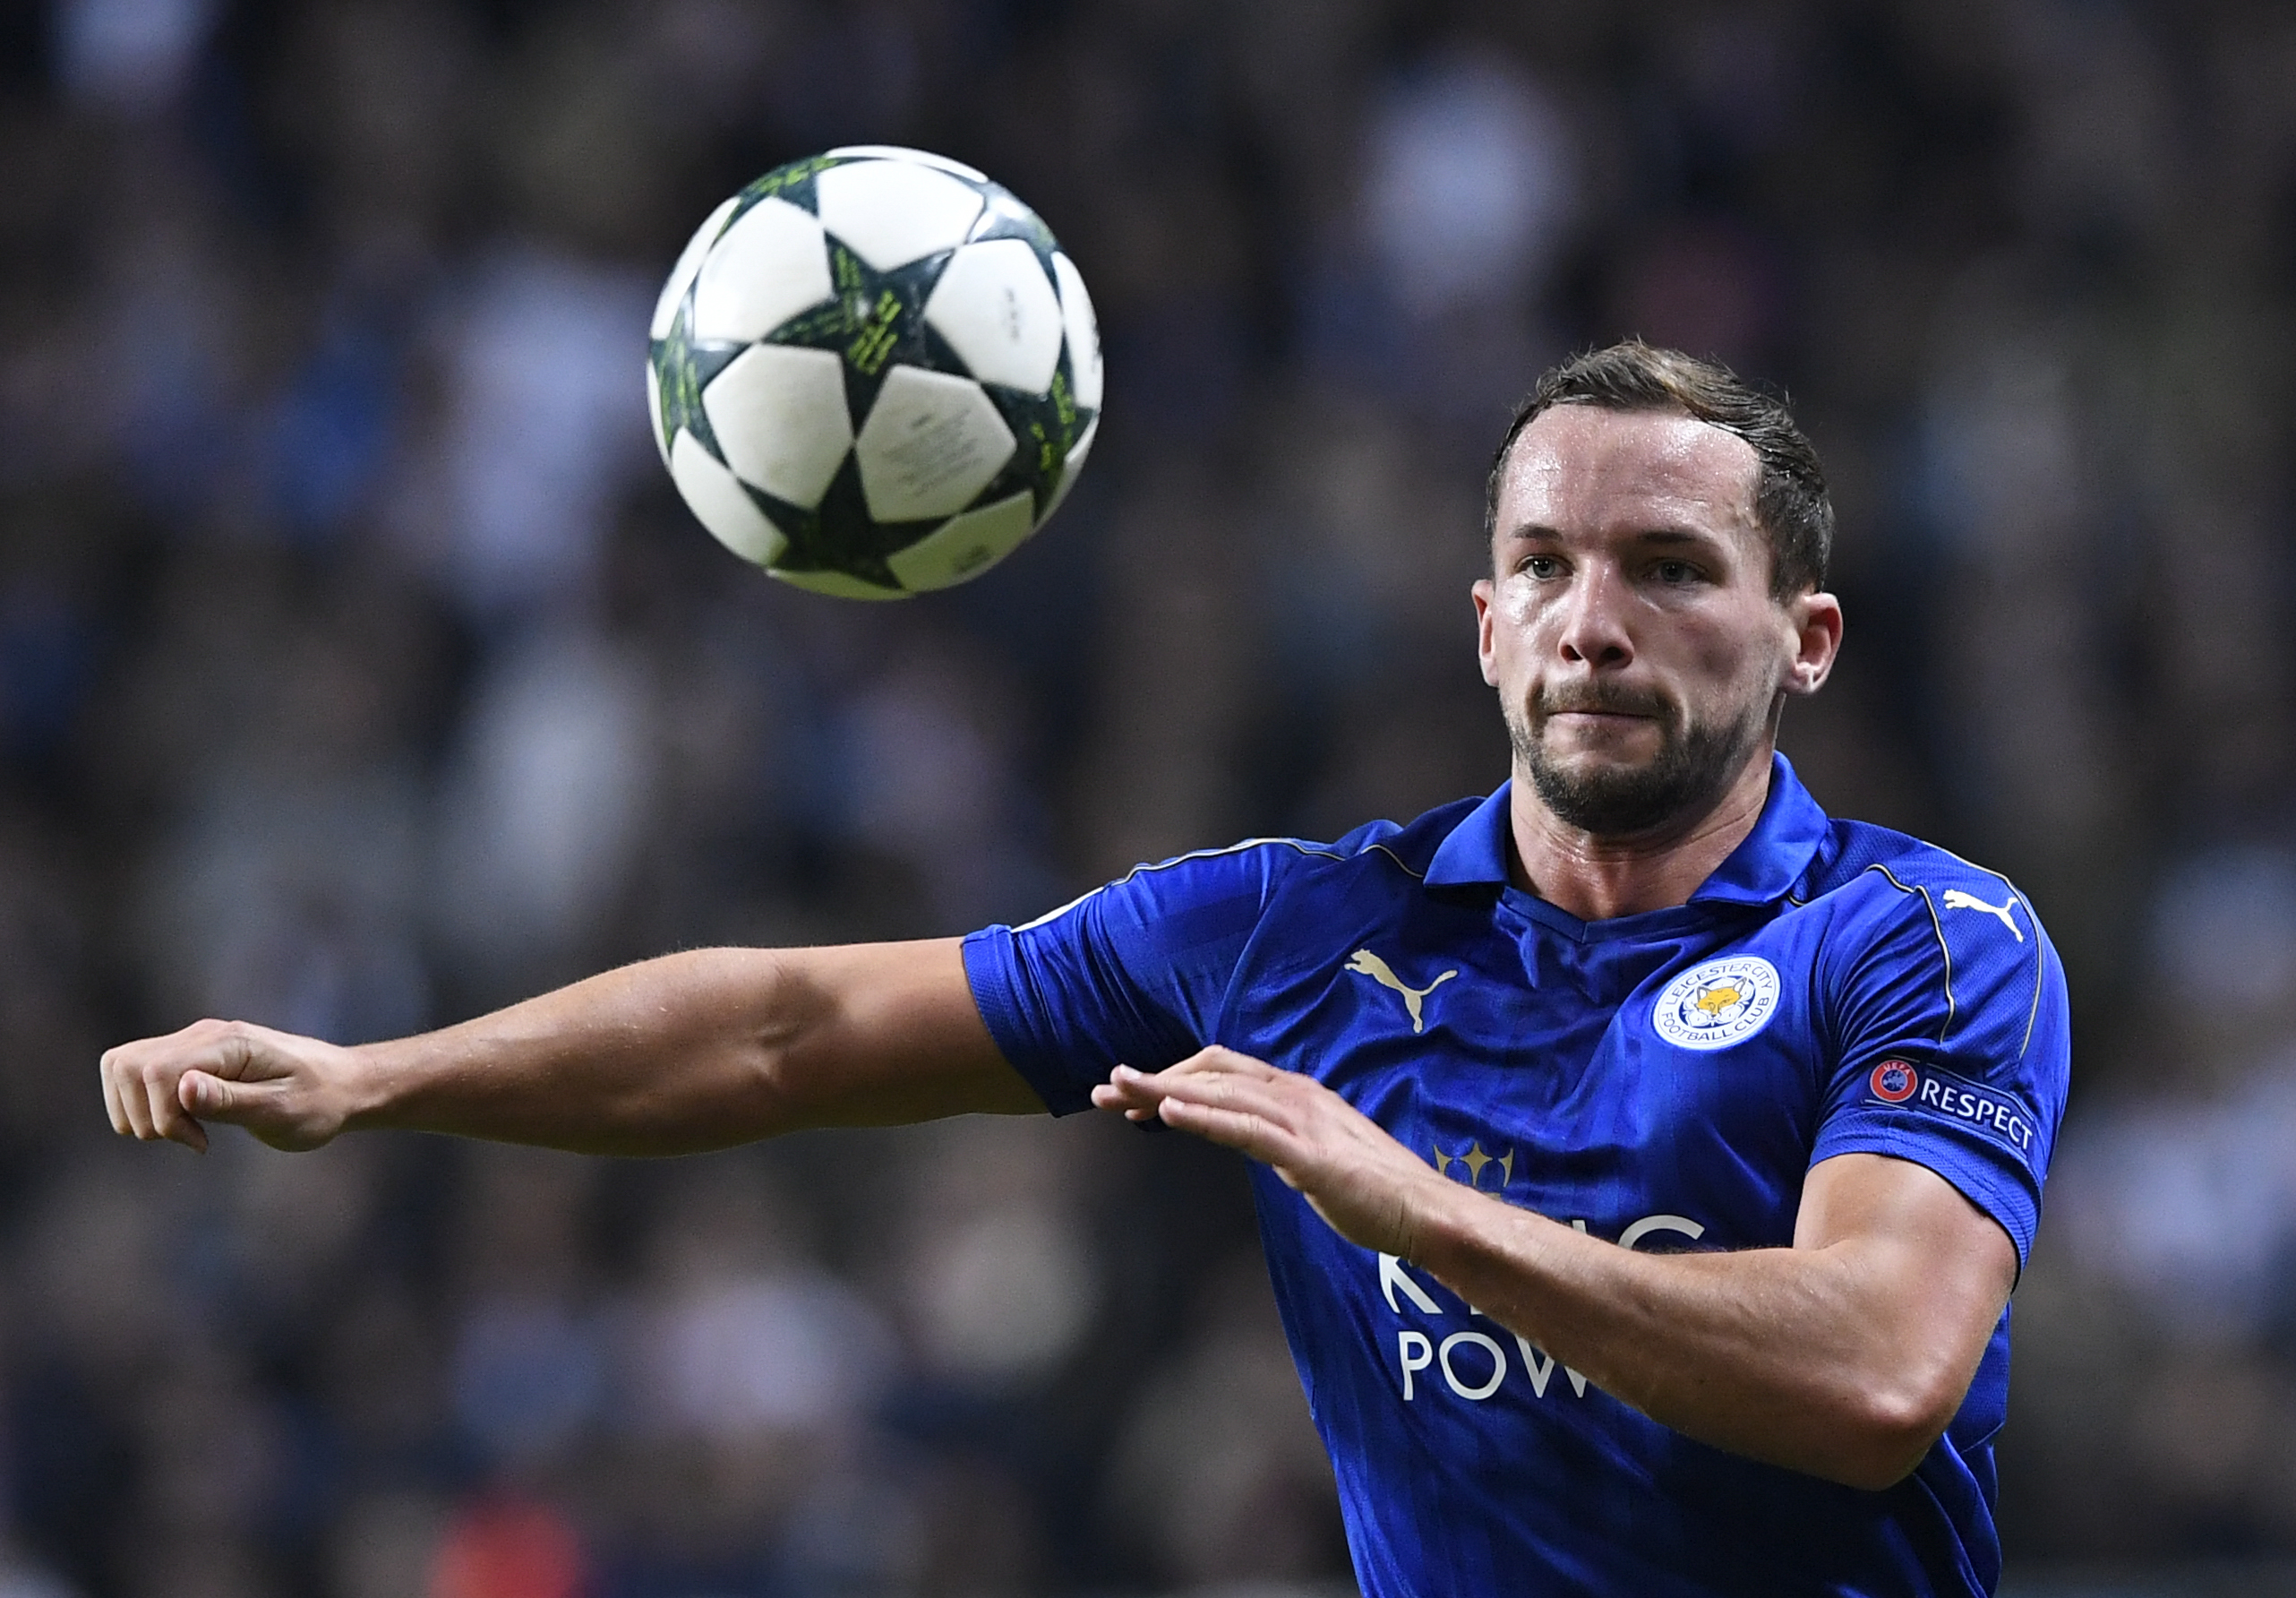 Leicester City's English midfielder Danny Drinkwater runs after the ball during the UEFA Champions League group G football match between FC Copenhagen and Leicester City FC at the Telia Parken stadium in Copenhagen on November 2, 2016.  / AFP PHOTO / JONATHAN NACKSTRAND